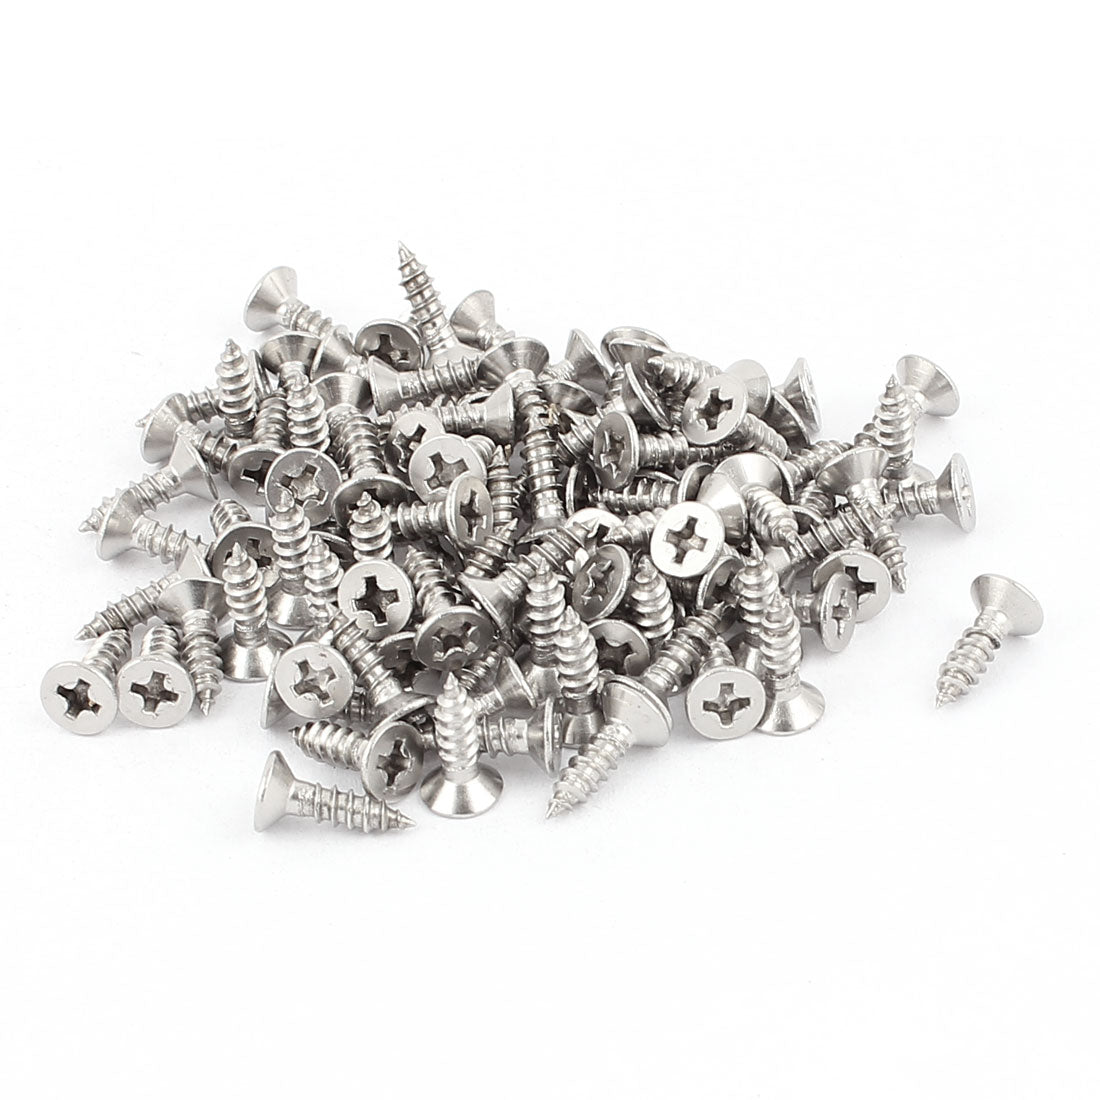 uxcell Uxcell 3.5mm x 13mm Stainless Steel Countersunk Cross Head Self Tapping Screw 100 Pcs